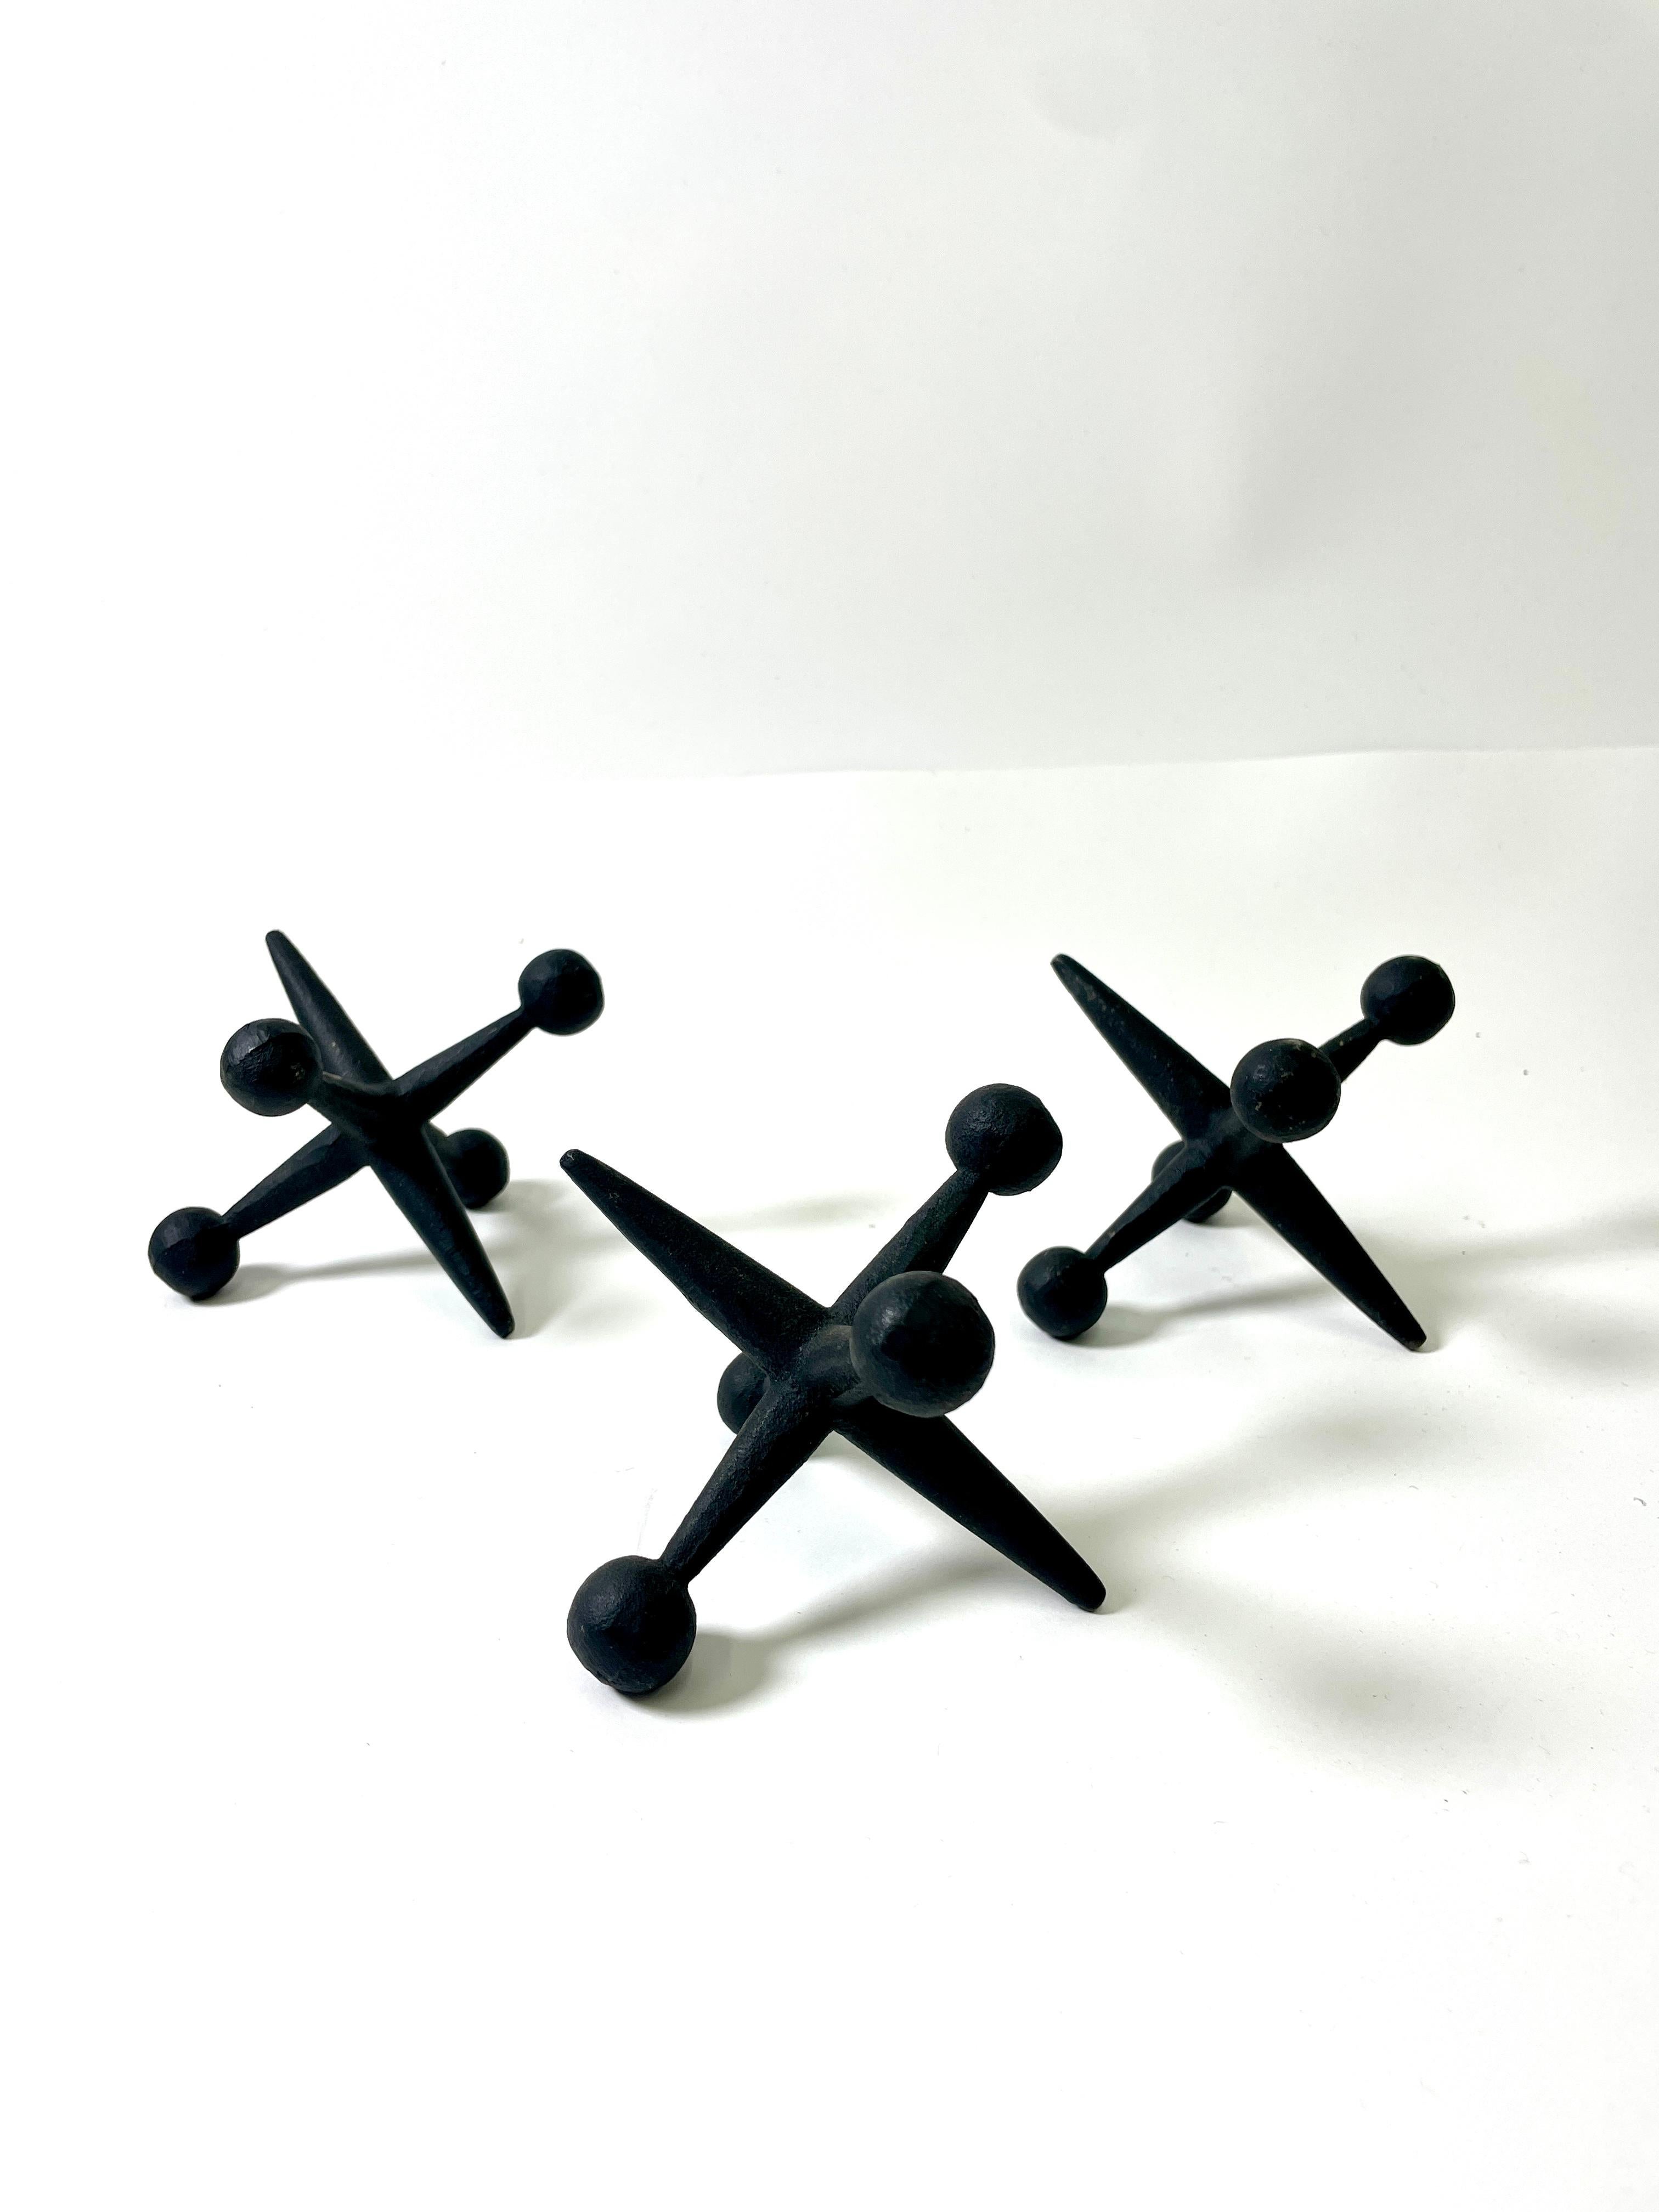 Set of Three Vintage Decorative Jacks made of iron with black lacque